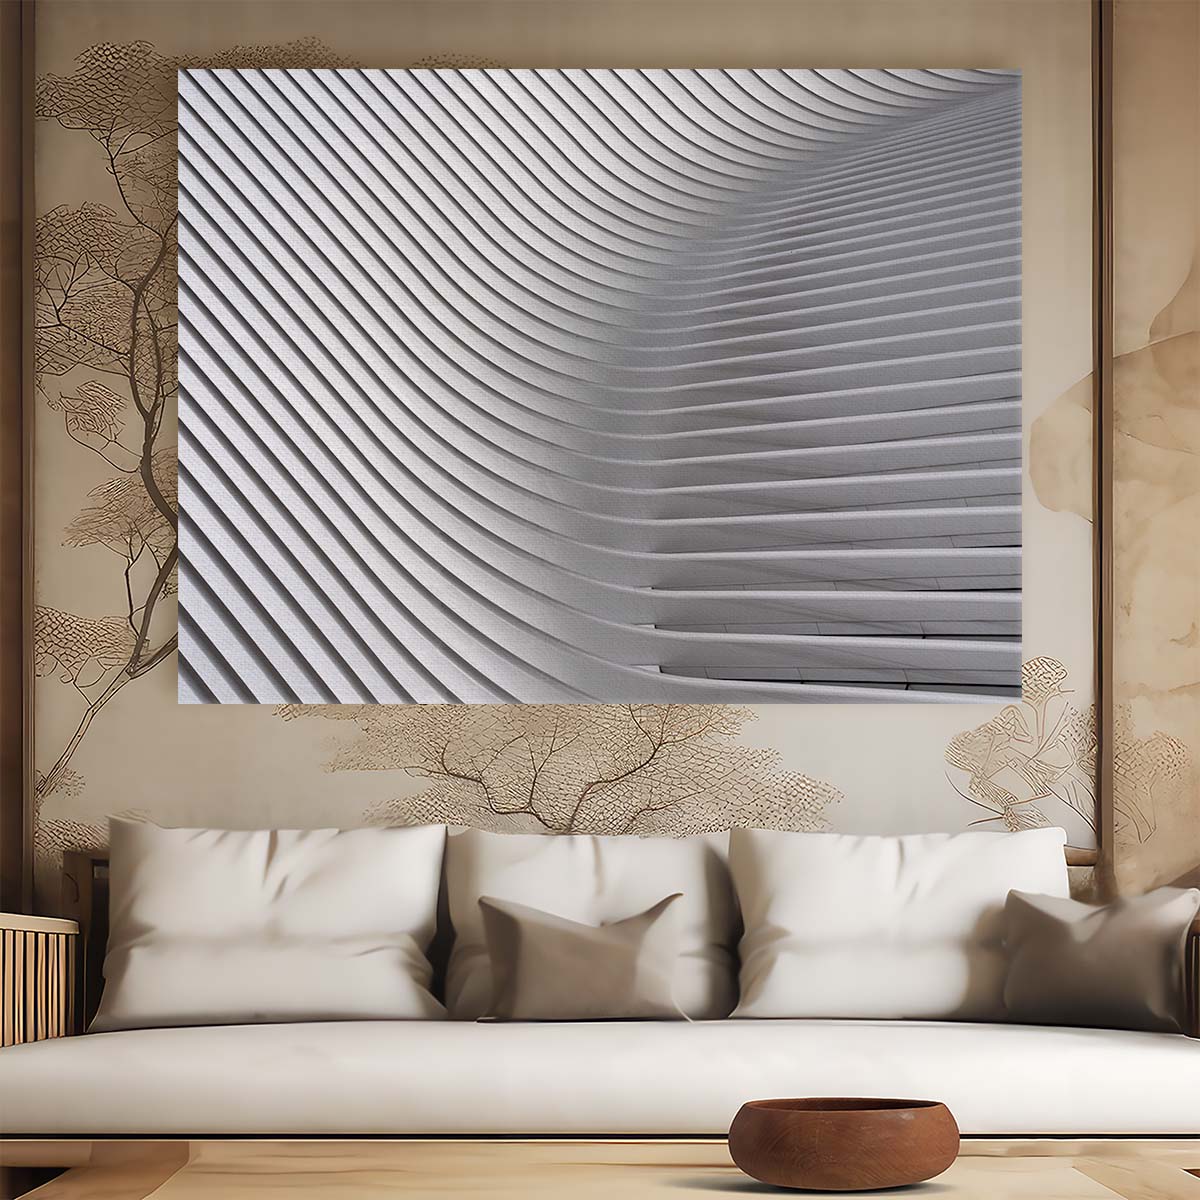 Santiago Calatrava Inspired Geometric Curves Wall Art by Luxuriance Designs. Made in USA.